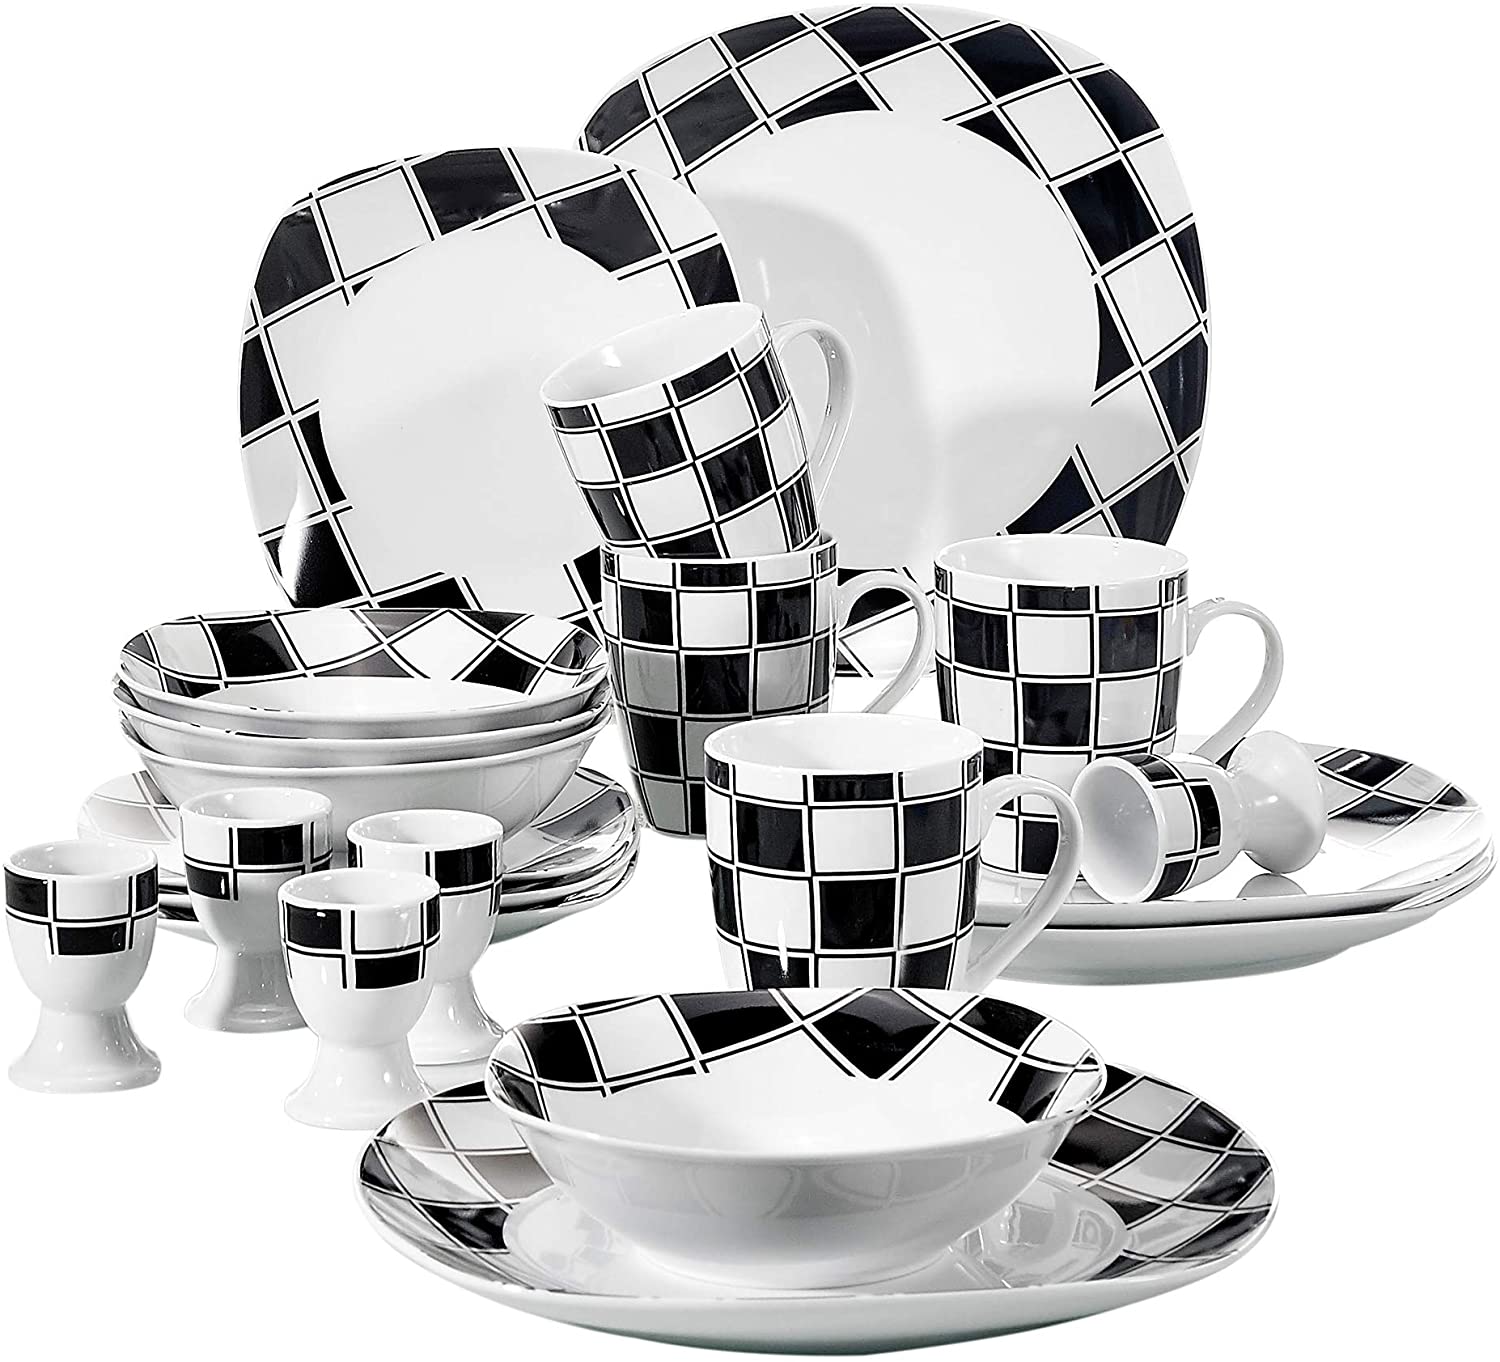 VEWEET Nicole Dinner Service 20 Pieces Porcelain Breakfast Service for 4 People with 4 Egg Cups, Coffee Cups 350 ml, Cereal Bowls, Dessert Plates and Flat Plates